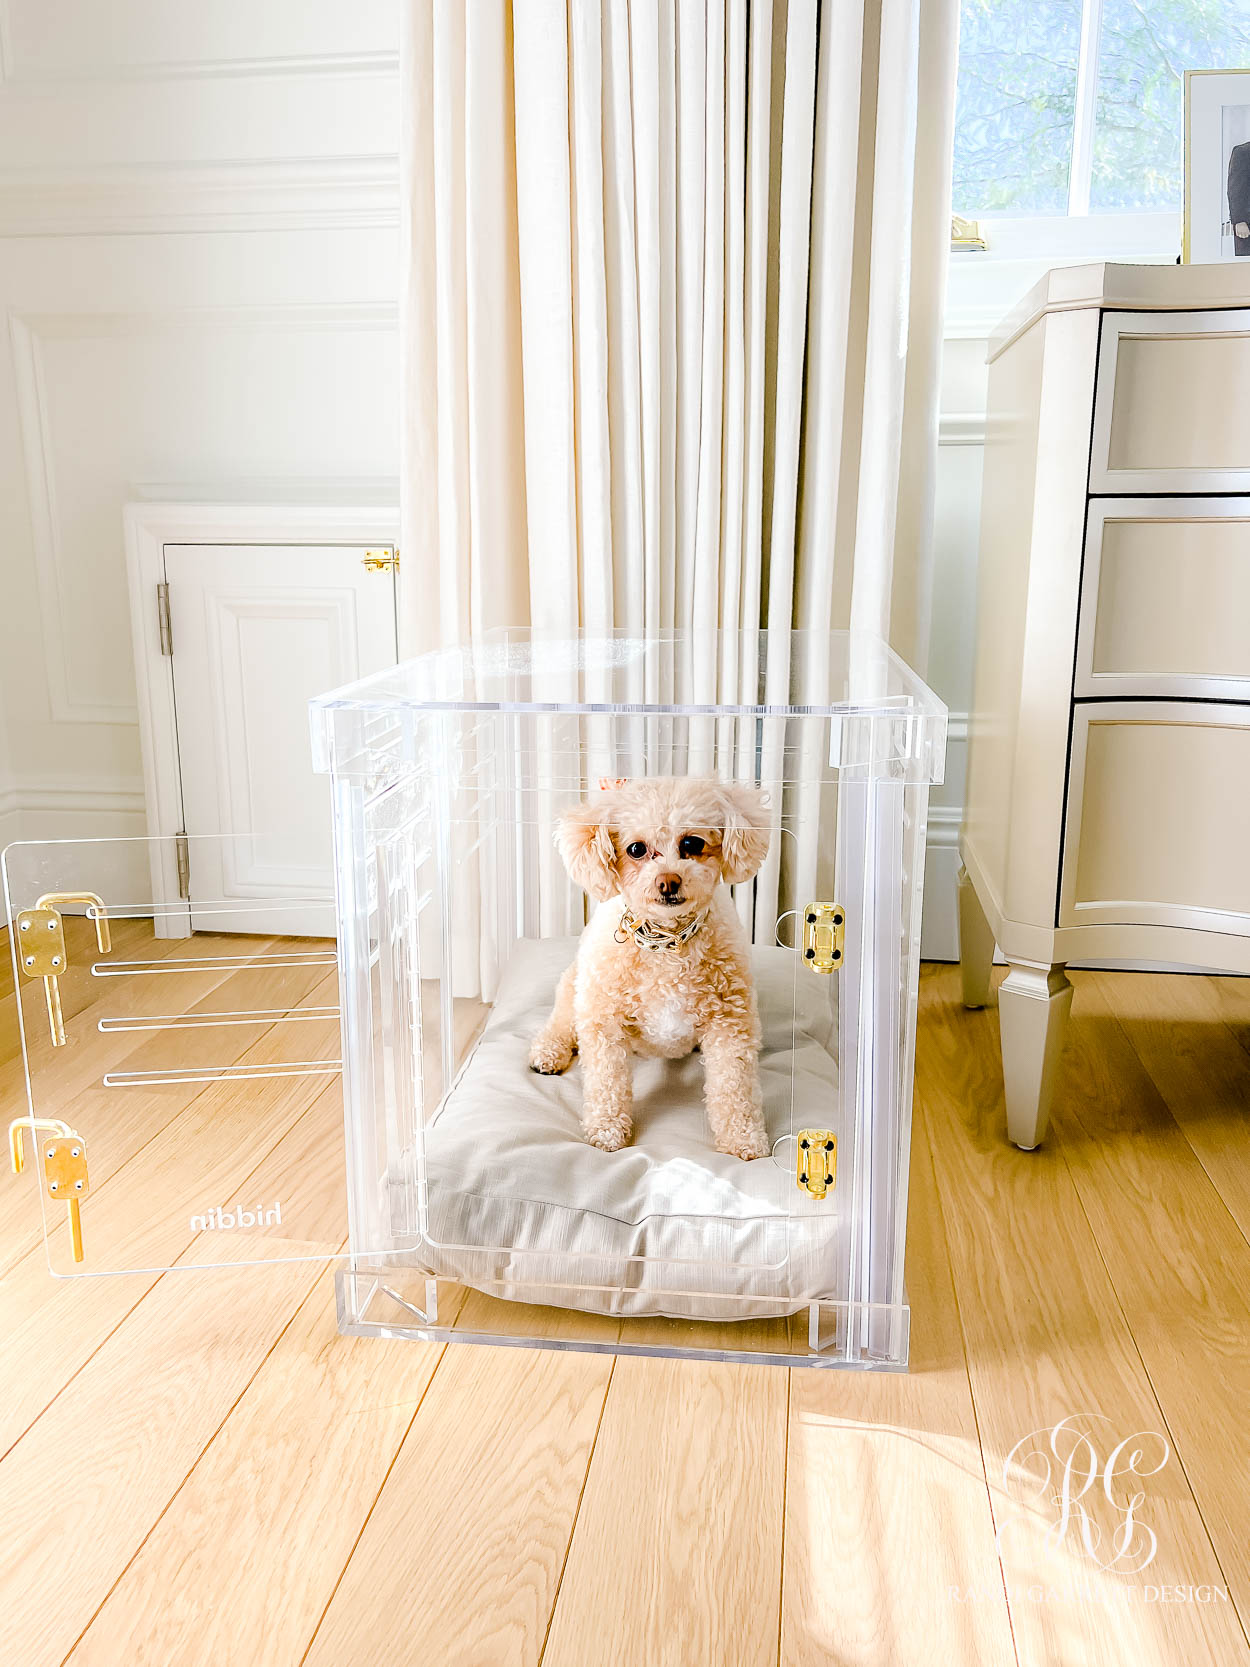 Designer Pet Products for your Home acrylic dog crate